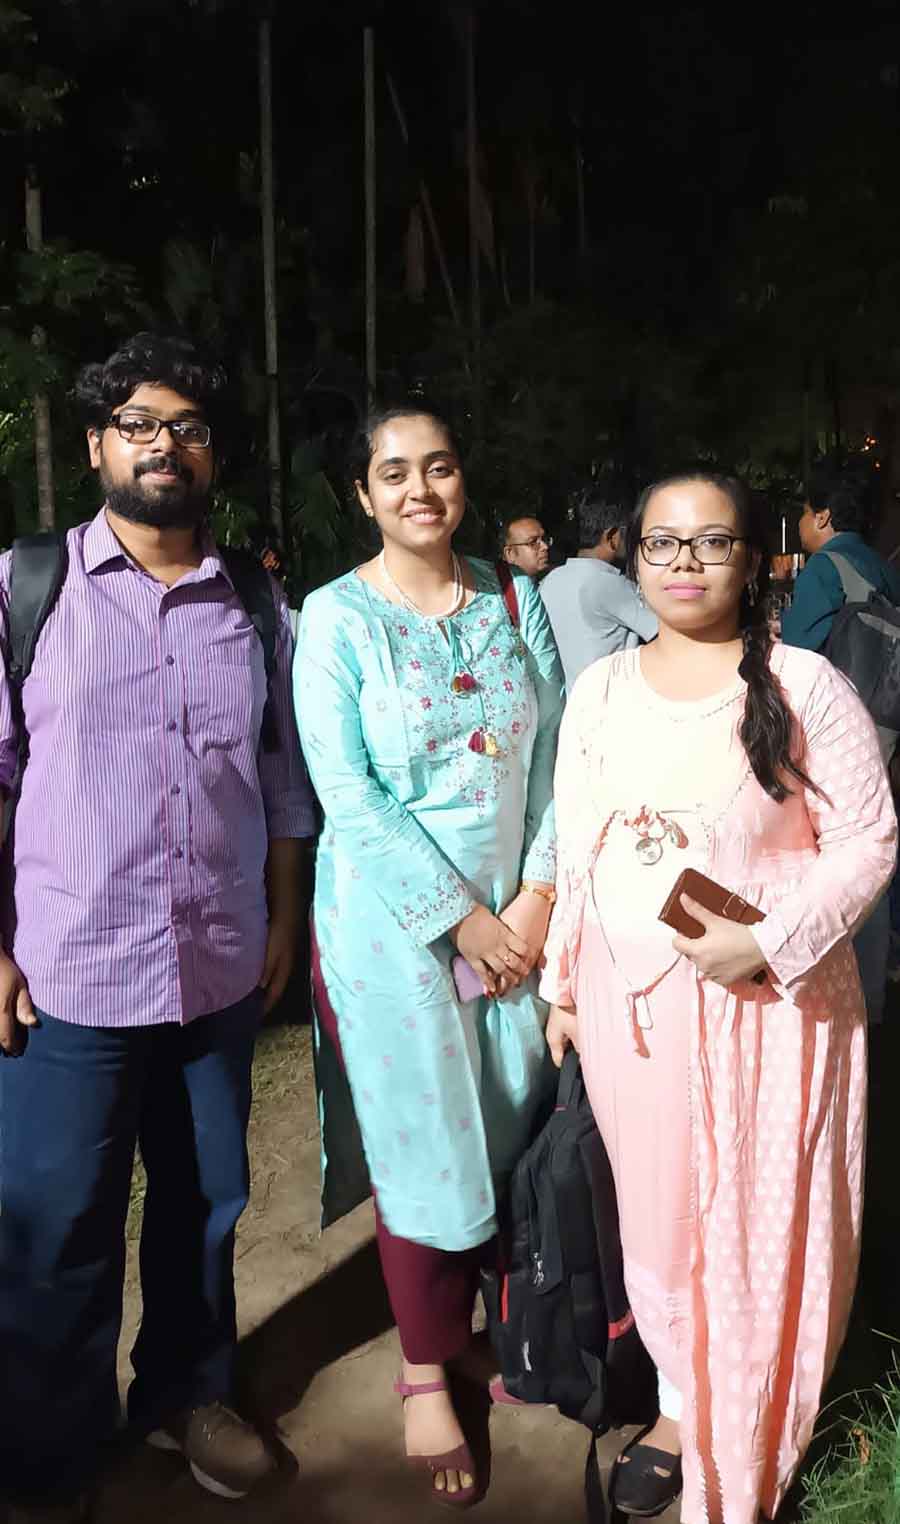 (From left) Logo designing competition winners Anirban Chakraborty, Ananya Ghatak and Ankita Sarkar attend the World Environment Day programme on Monday. The trio are research students from the School of Oceanographic Research, Jadavpur University. Anirban mentioned how they, as research students, felt merely discussing about climate issues would not be effective unless action was taken and people’s efforts was crucial in solving such grave problems 